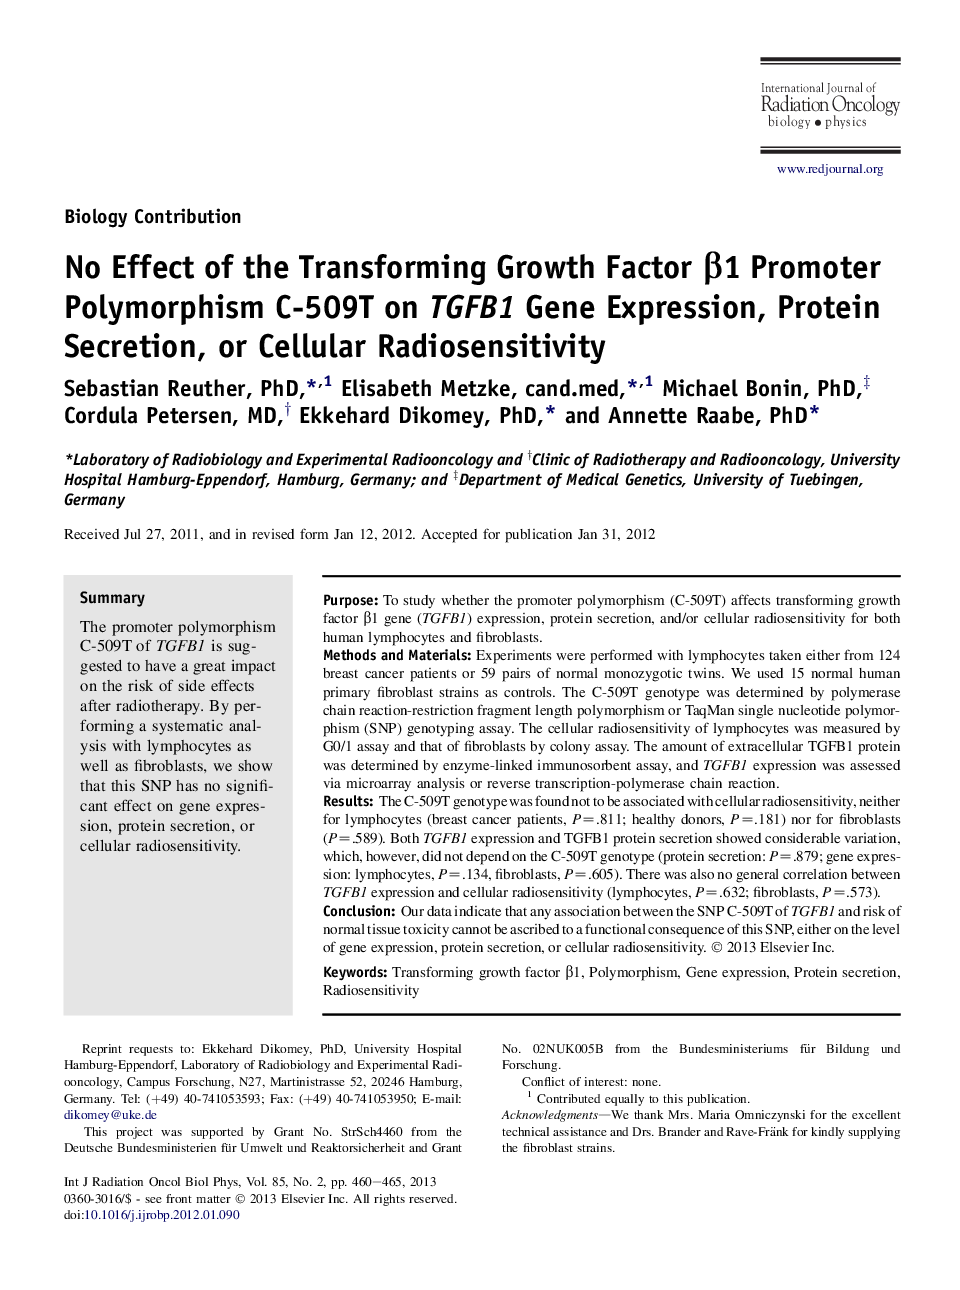 No Effect of the Transforming Growth Factor Î²1 Promoter Polymorphism C-509T on TGFB1 Gene Expression, Protein Secretion, or Cellular Radiosensitivity